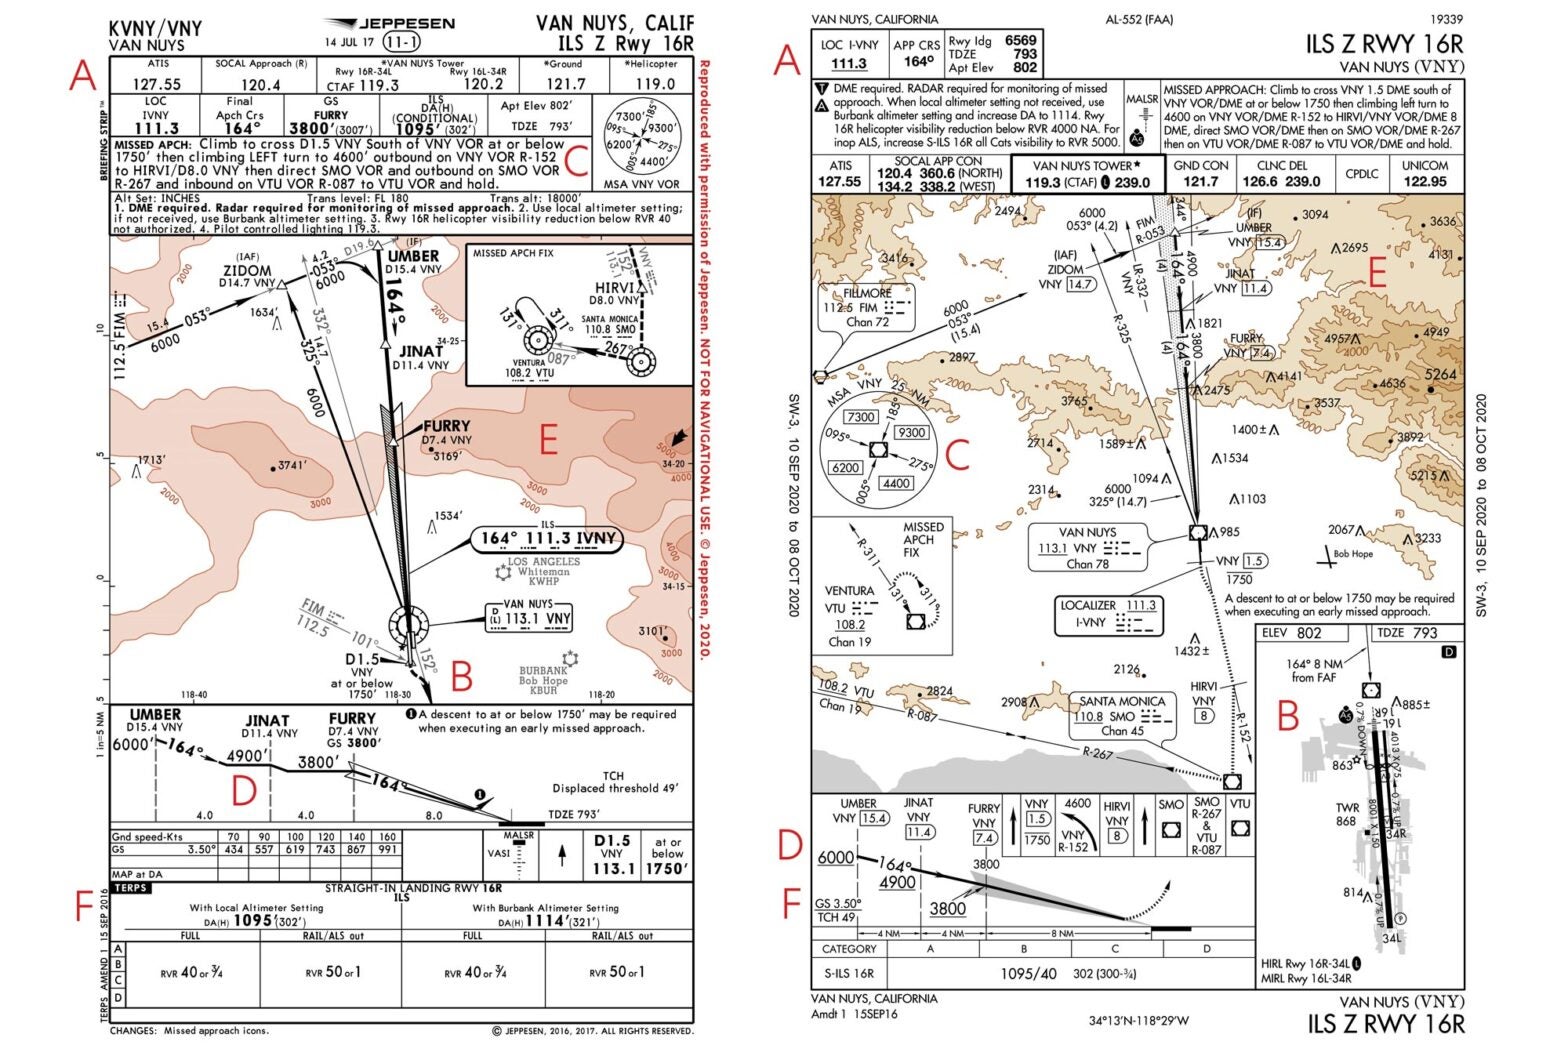 Two Kinds of Instrument Approach Charts